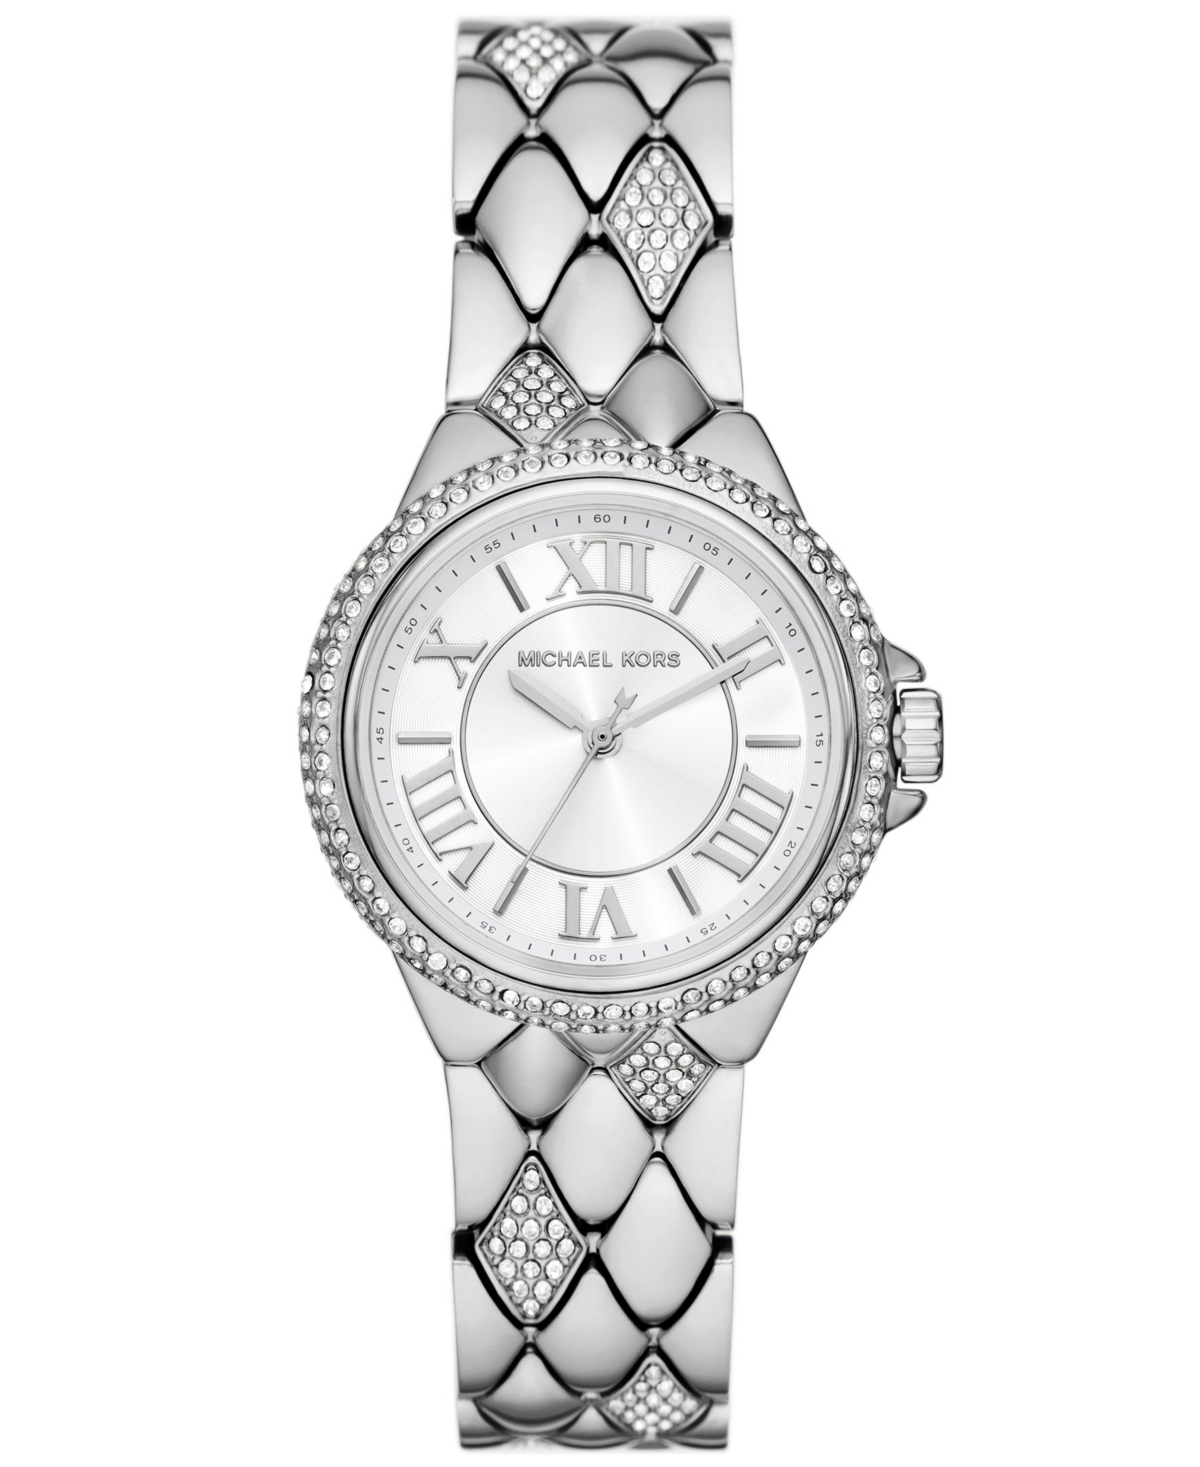 Michael Kors Women's Camille Three-hand Silver-tone Stainless Steel Watch 33mm